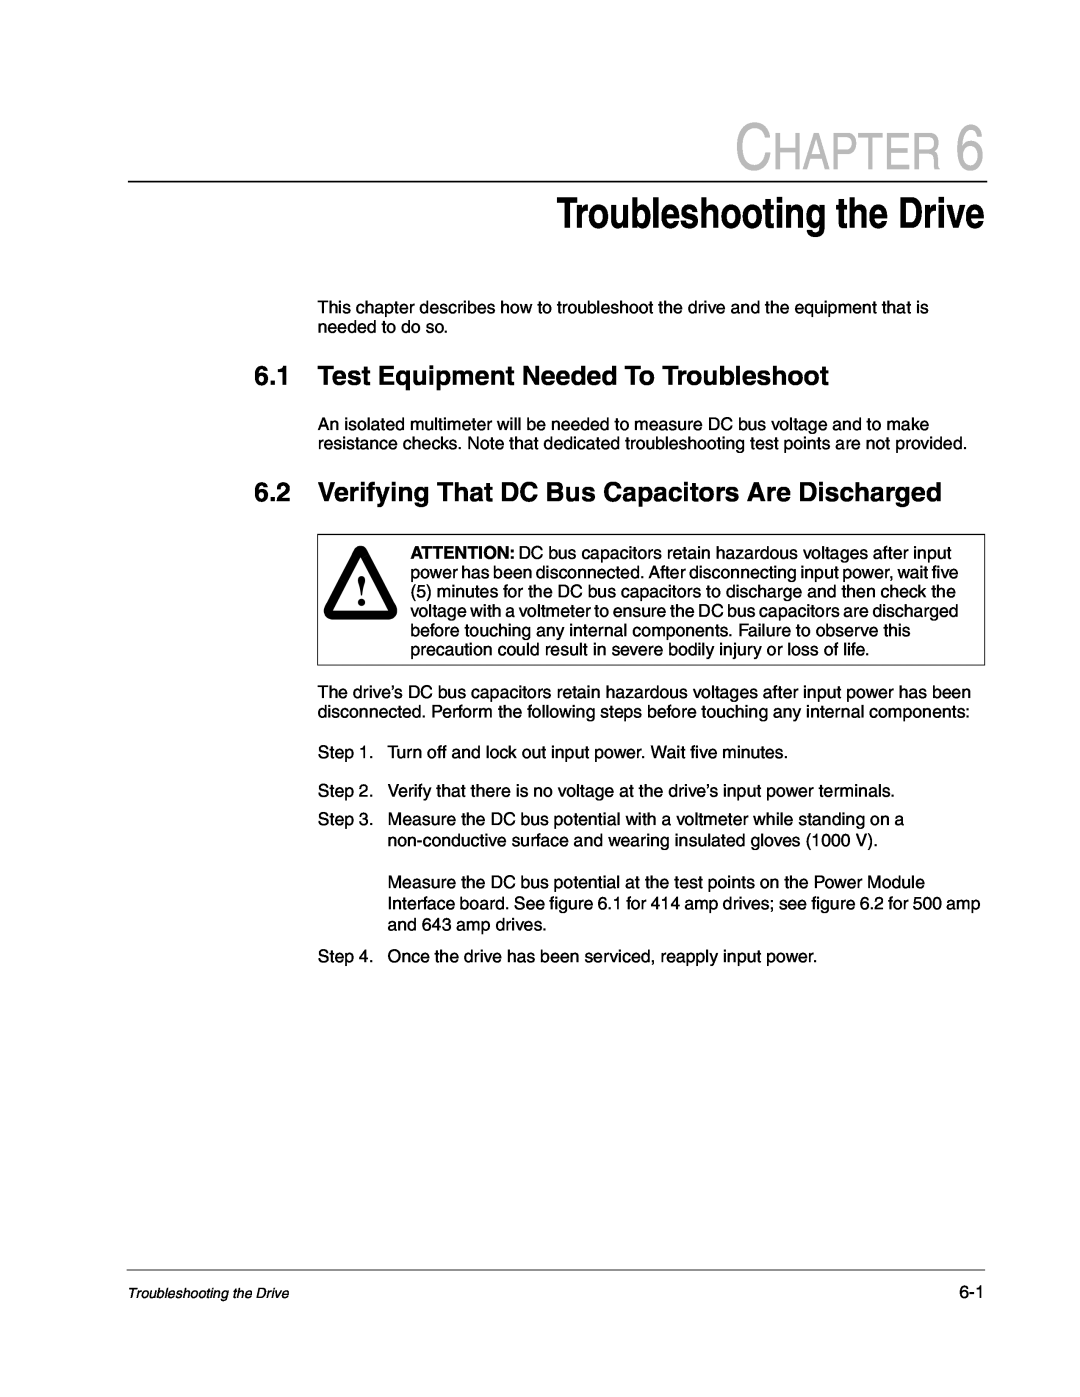 Carrier D2-3466-2 instruction manual Troubleshooting the Drive, Test Equipment Needed To Troubleshoot, Chapter 